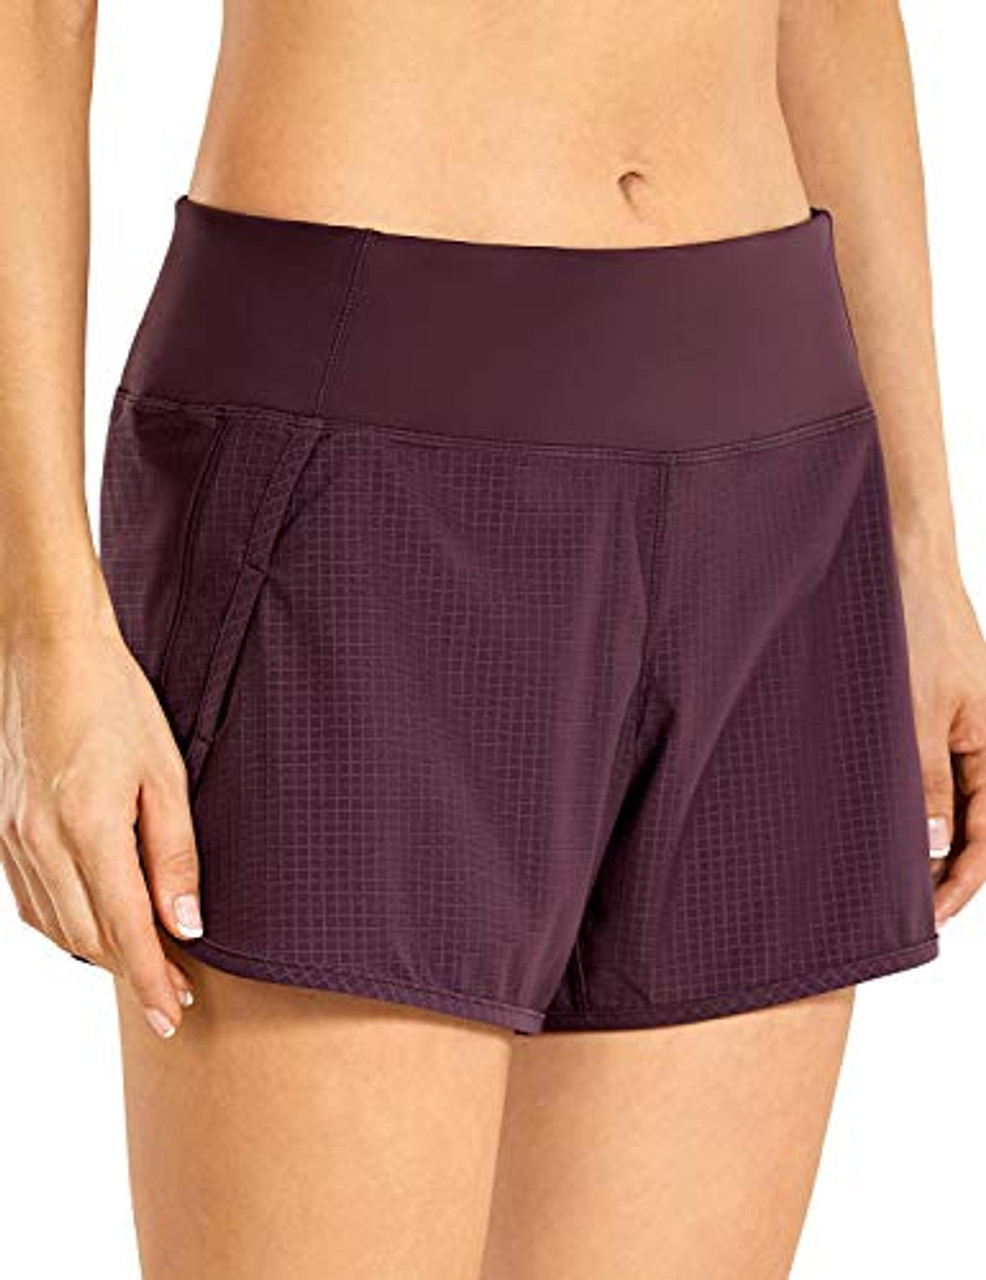 CRZ YOGA Women's Mid-Rise Quick-Dry Workout Running Athletic